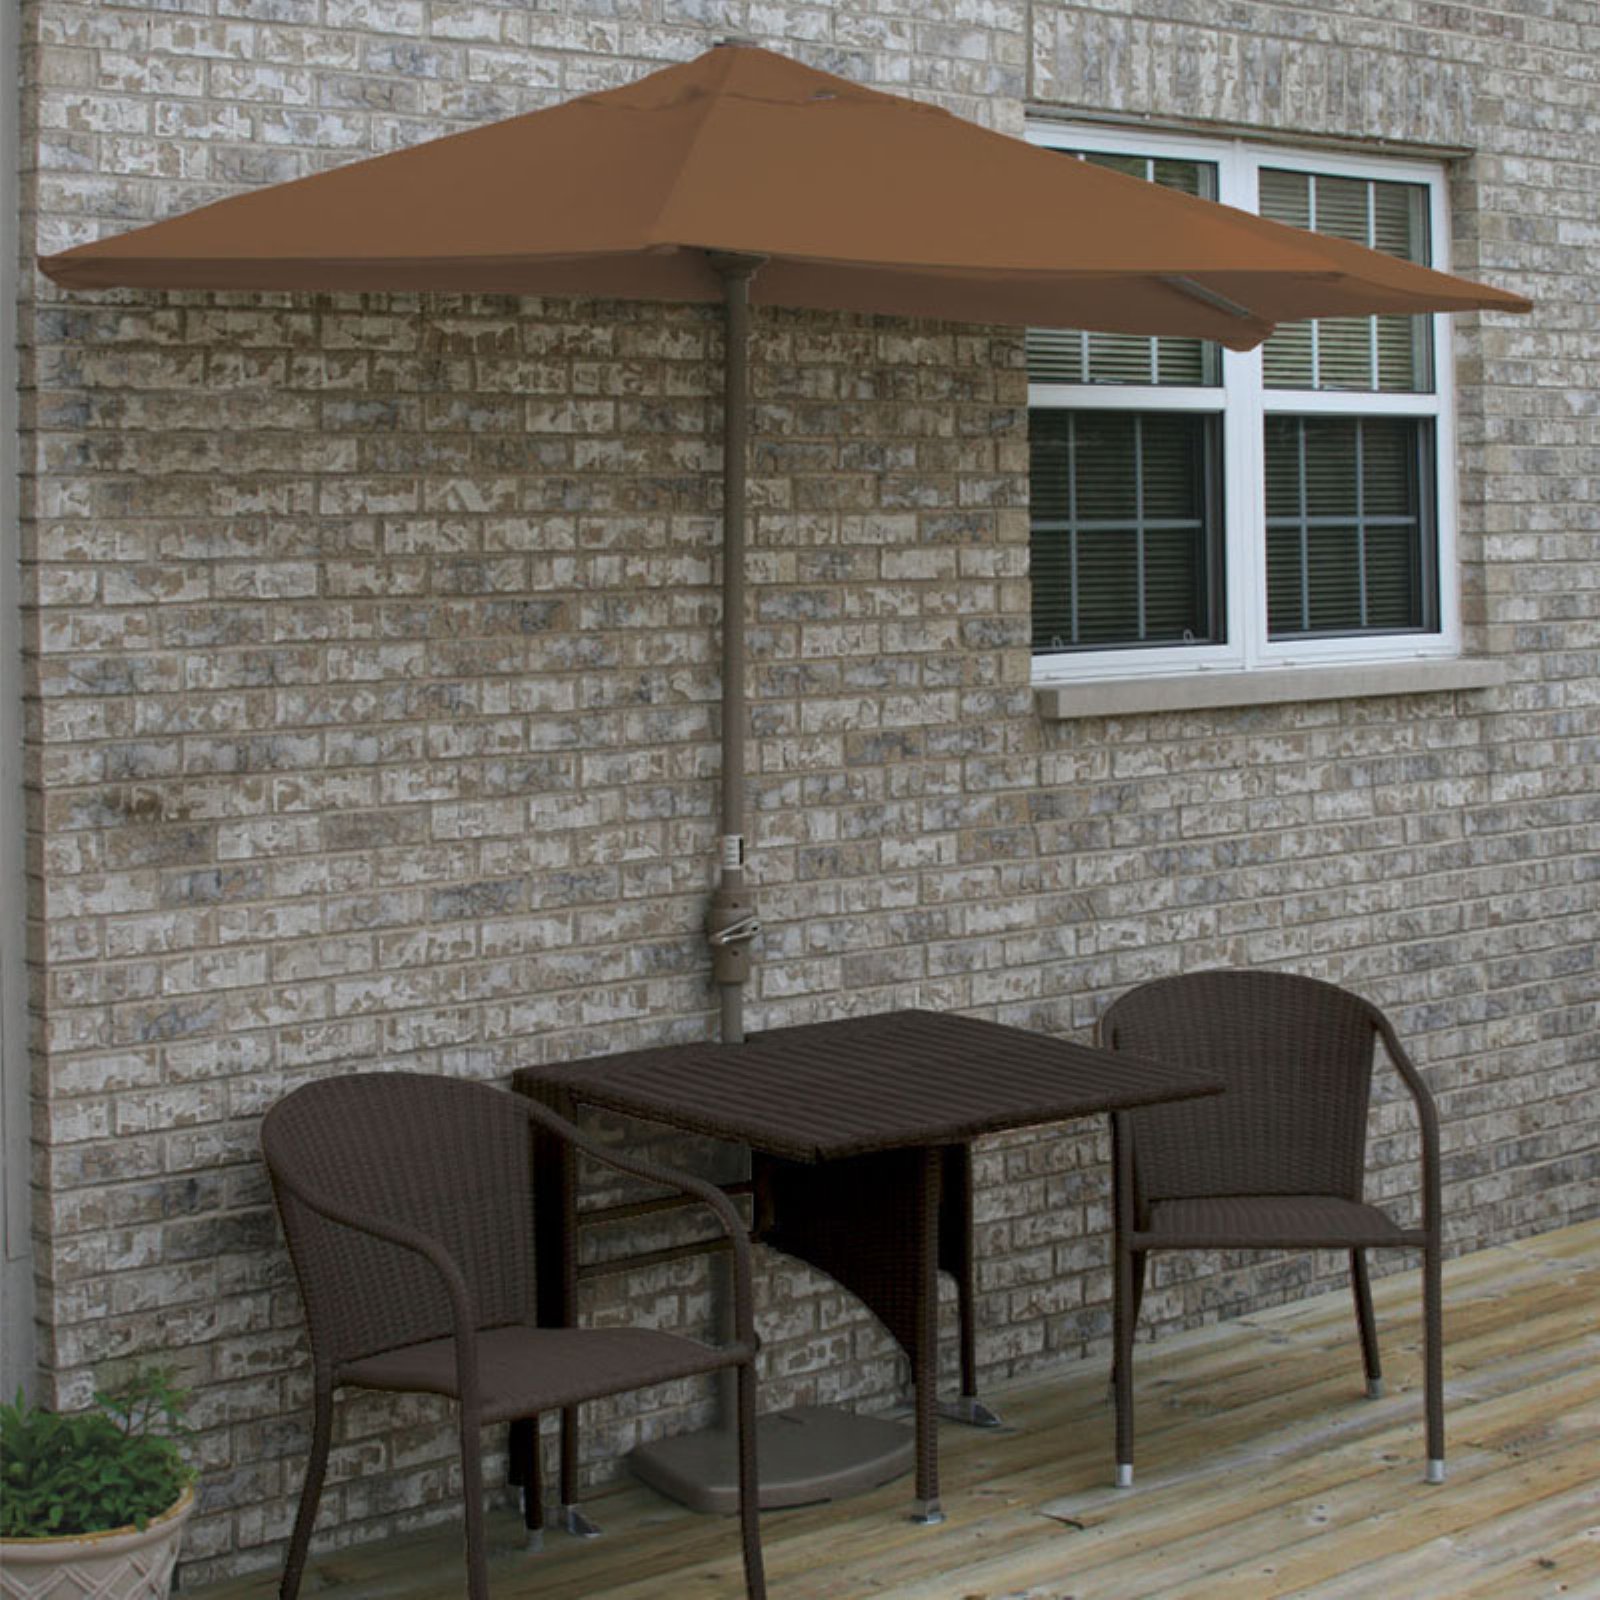 Blue Star Group Terrace Mates Daniella All-Weather Wicker Java Color Table Set w/ 7.5'-Wide OFF-THE-WALL BRELLA - Forest Green Sunbrella Canopy - image 2 of 9